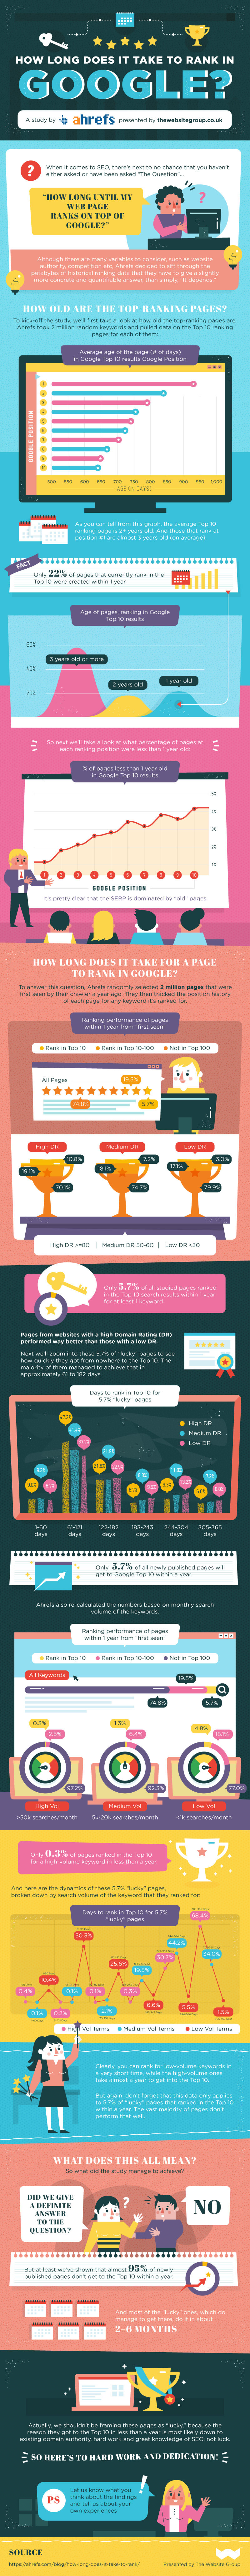 how long does it take to rank in google infographic